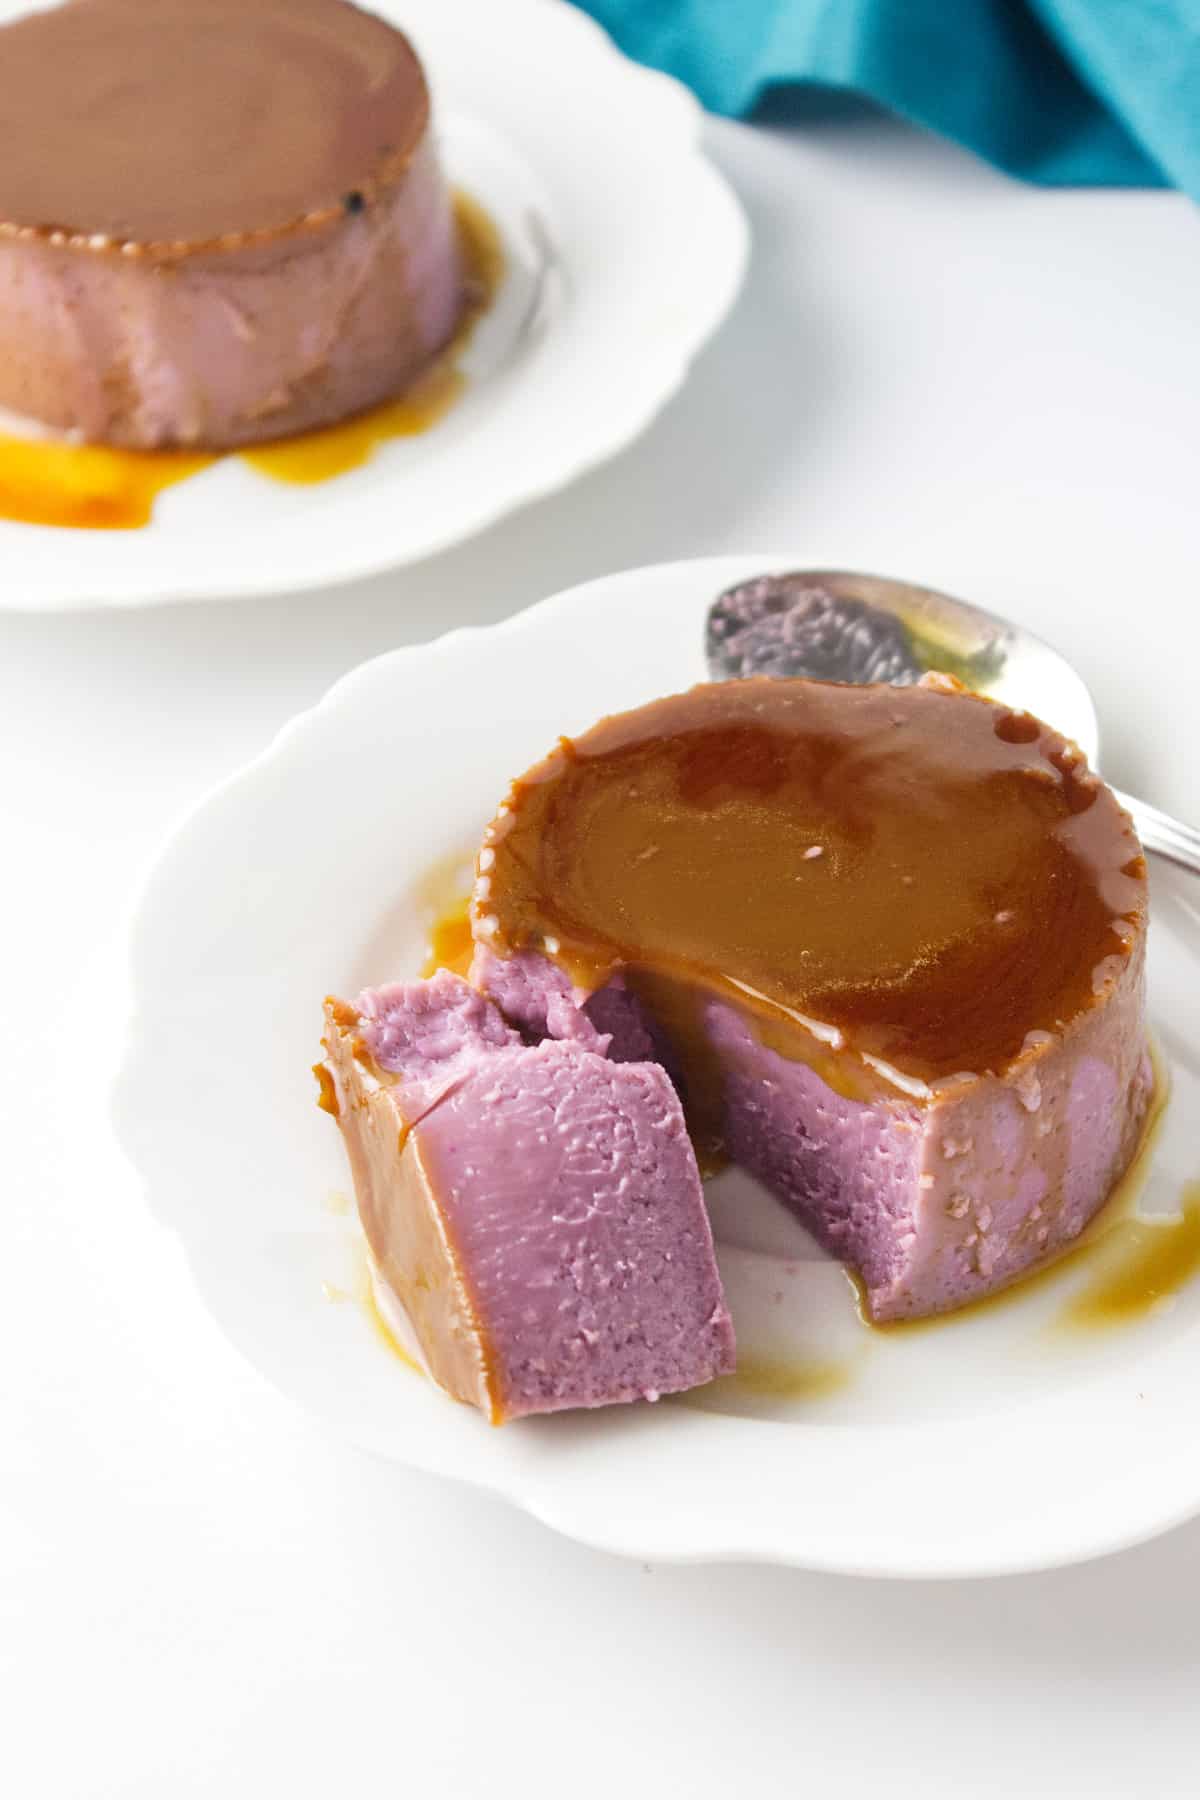 ube leche flan turned out in a saucer.